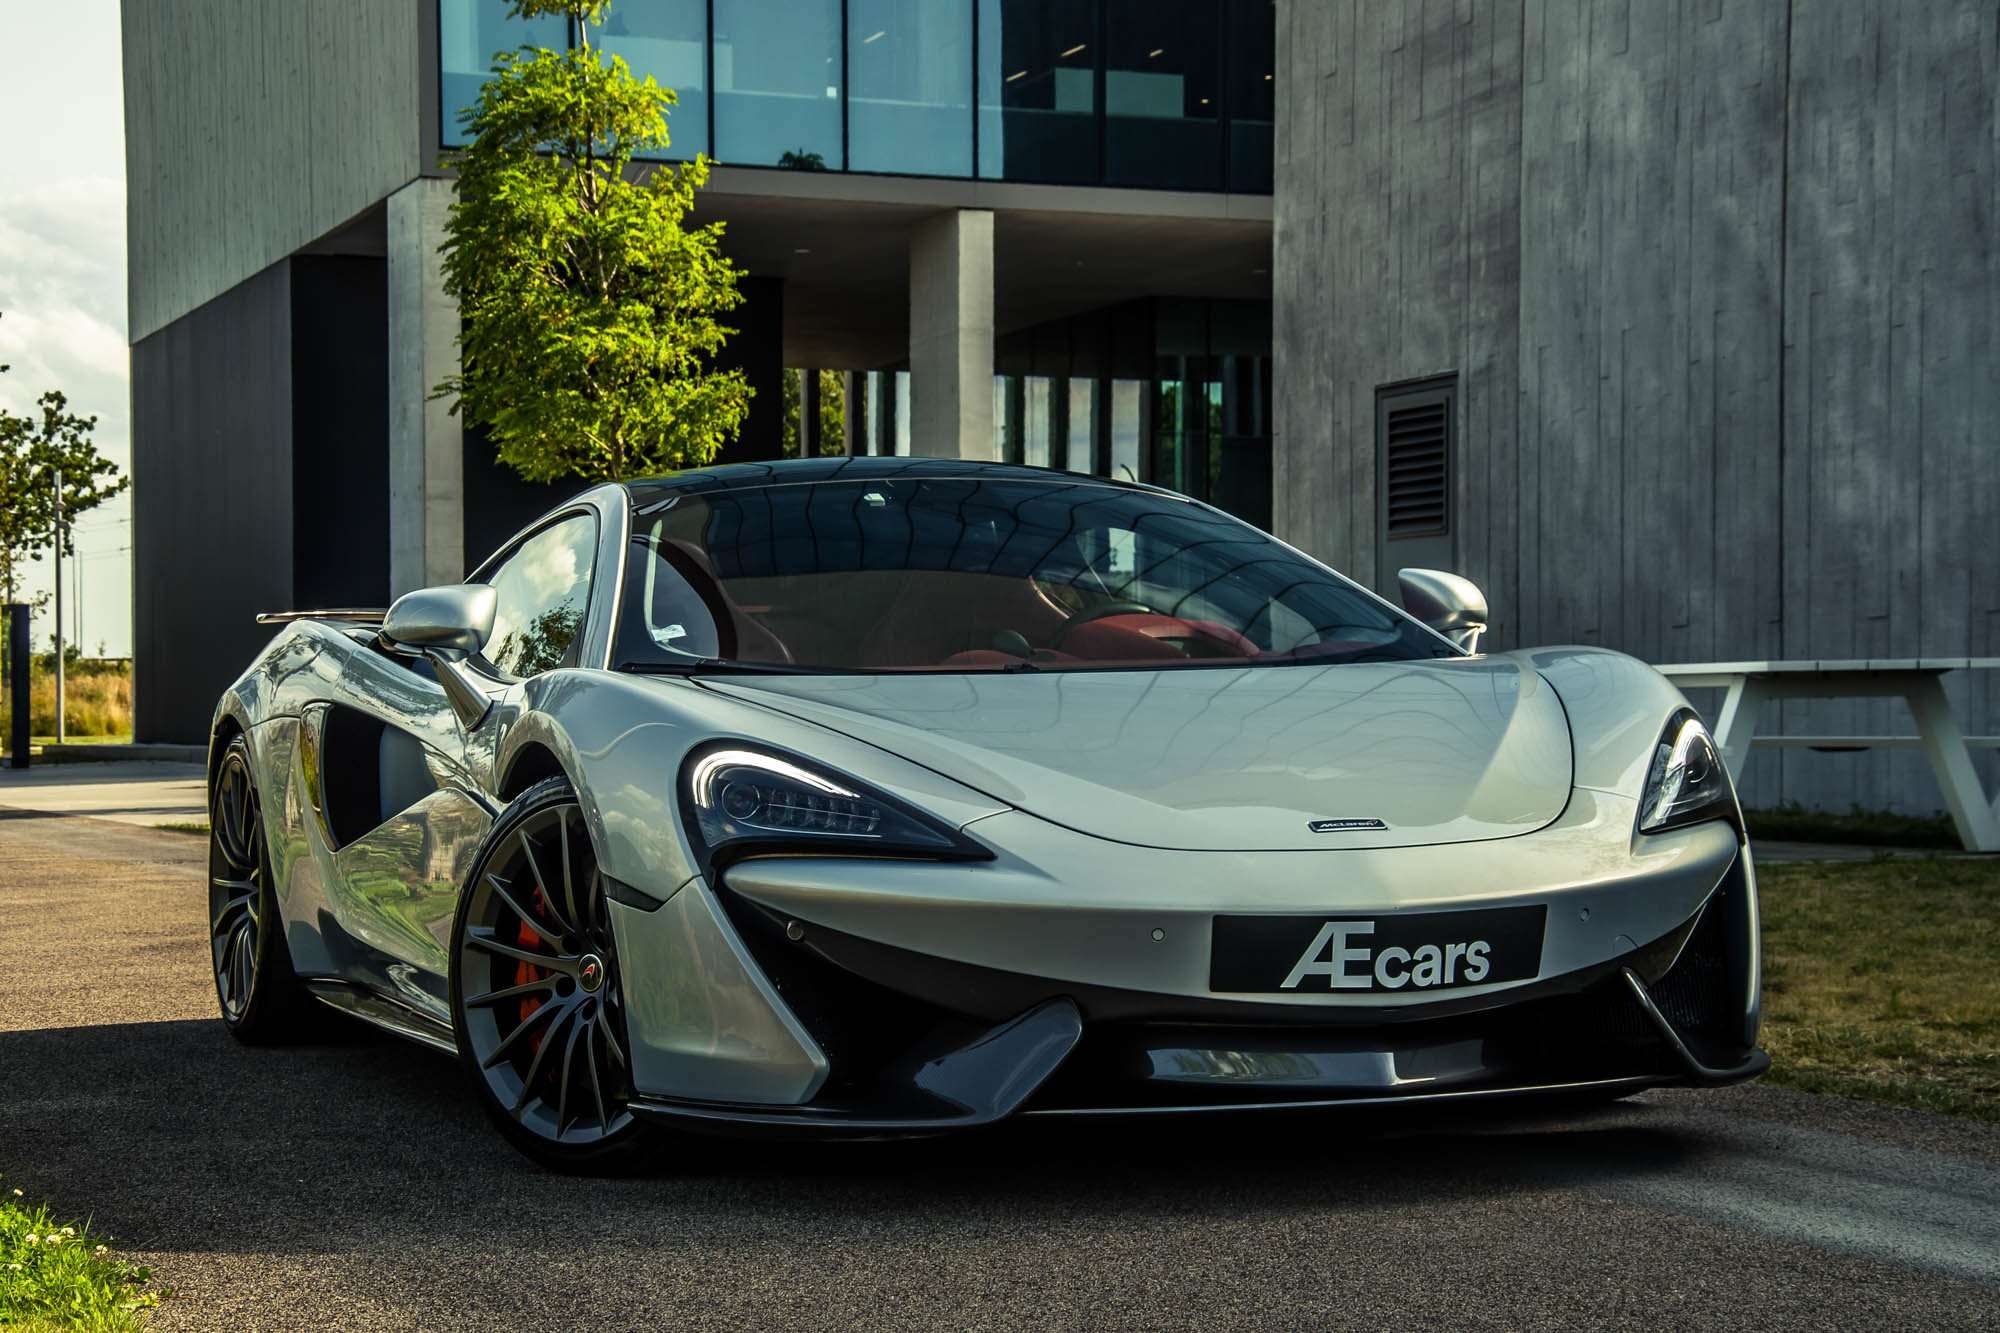 McLaren 570GT Coupe in Silver used in Izegem for € 169,950.-